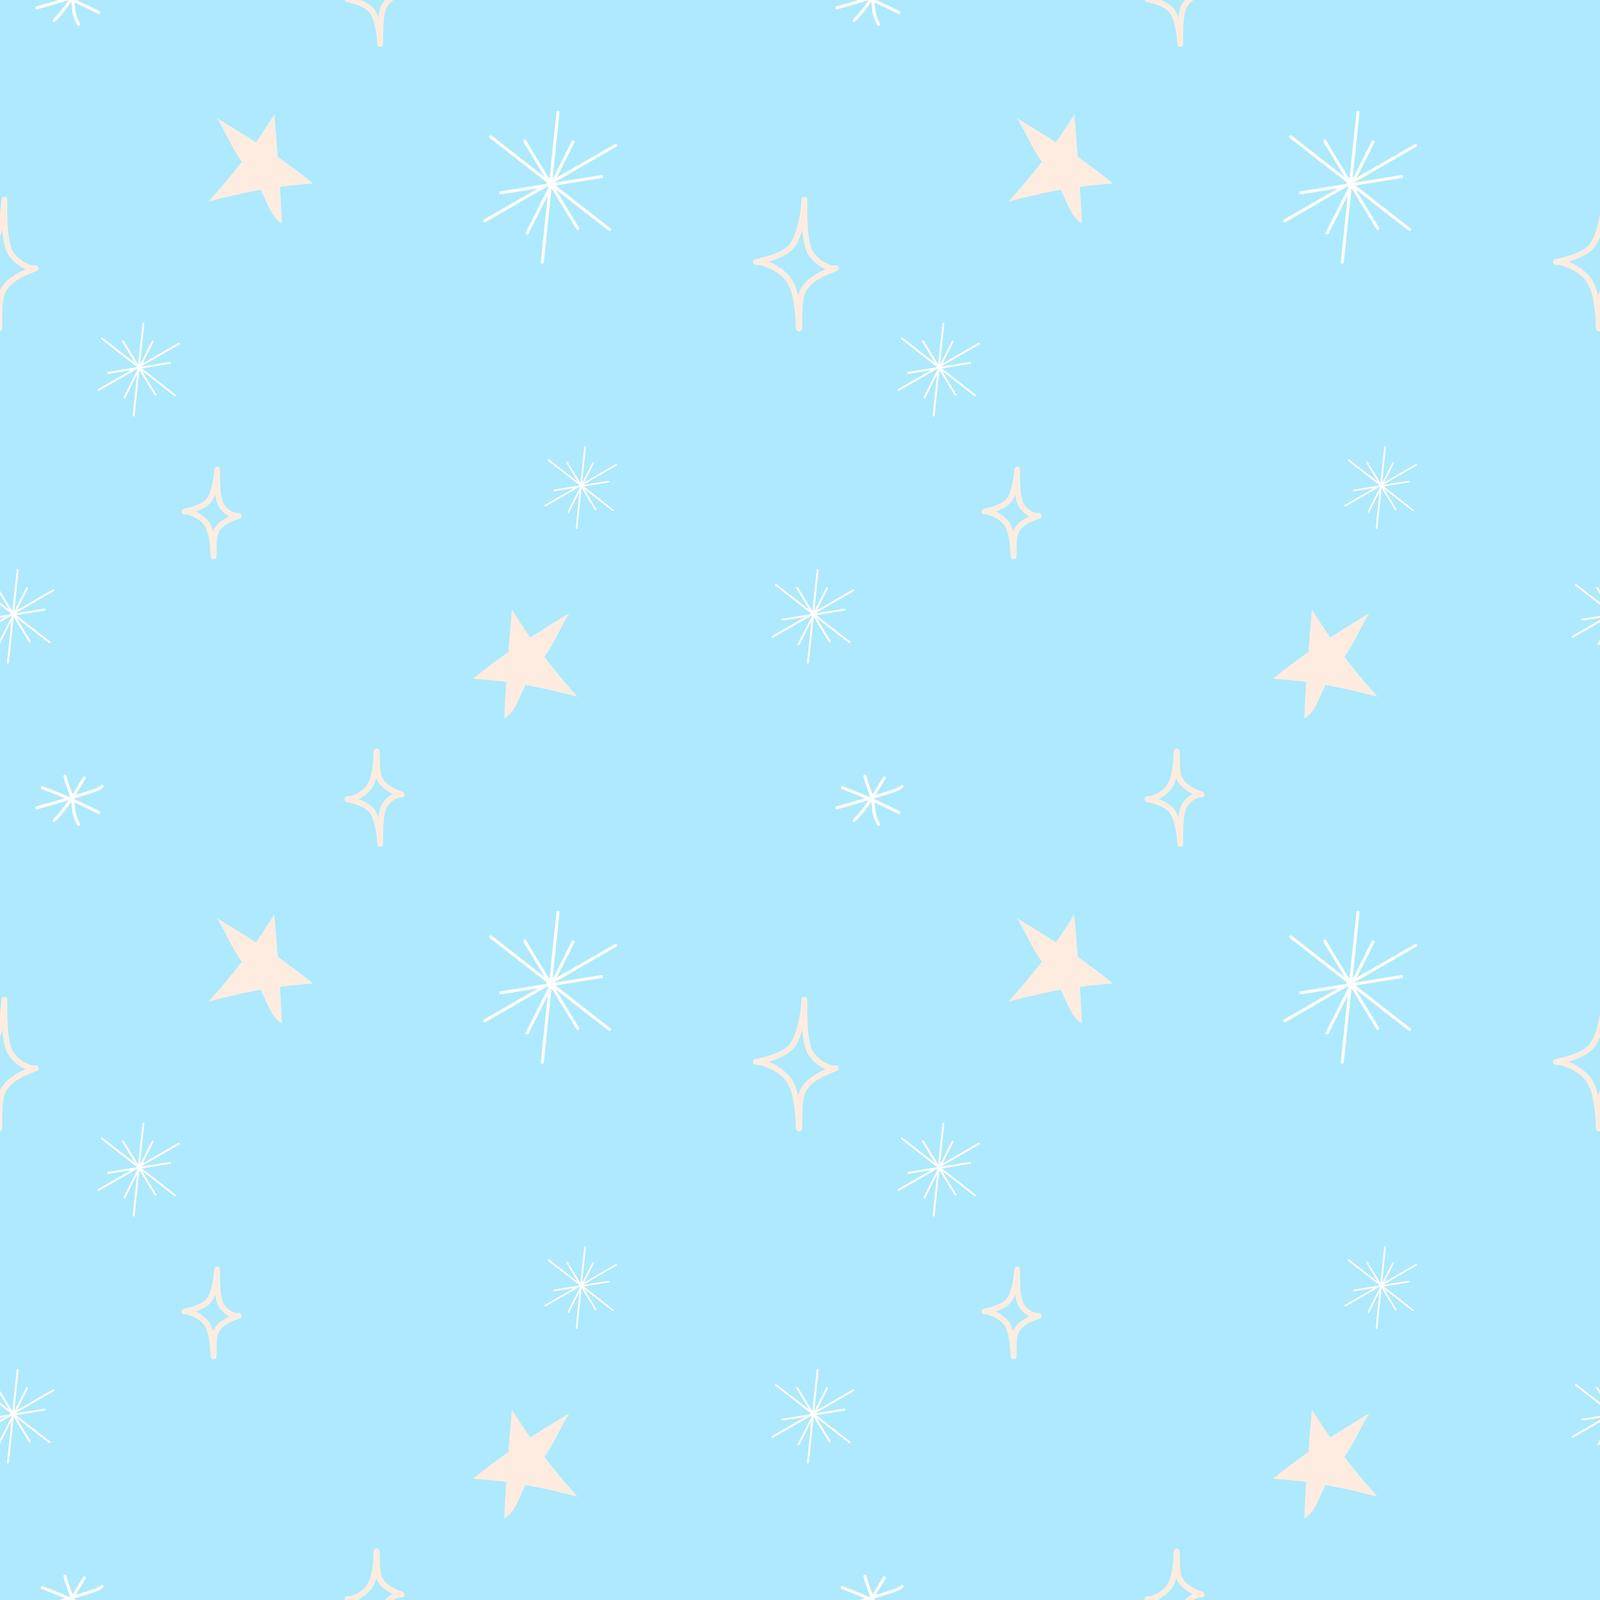 Vector seamless hand drawn simple snow pattern. Winter background with snowfall and stars EPS illustration by Alxyzt